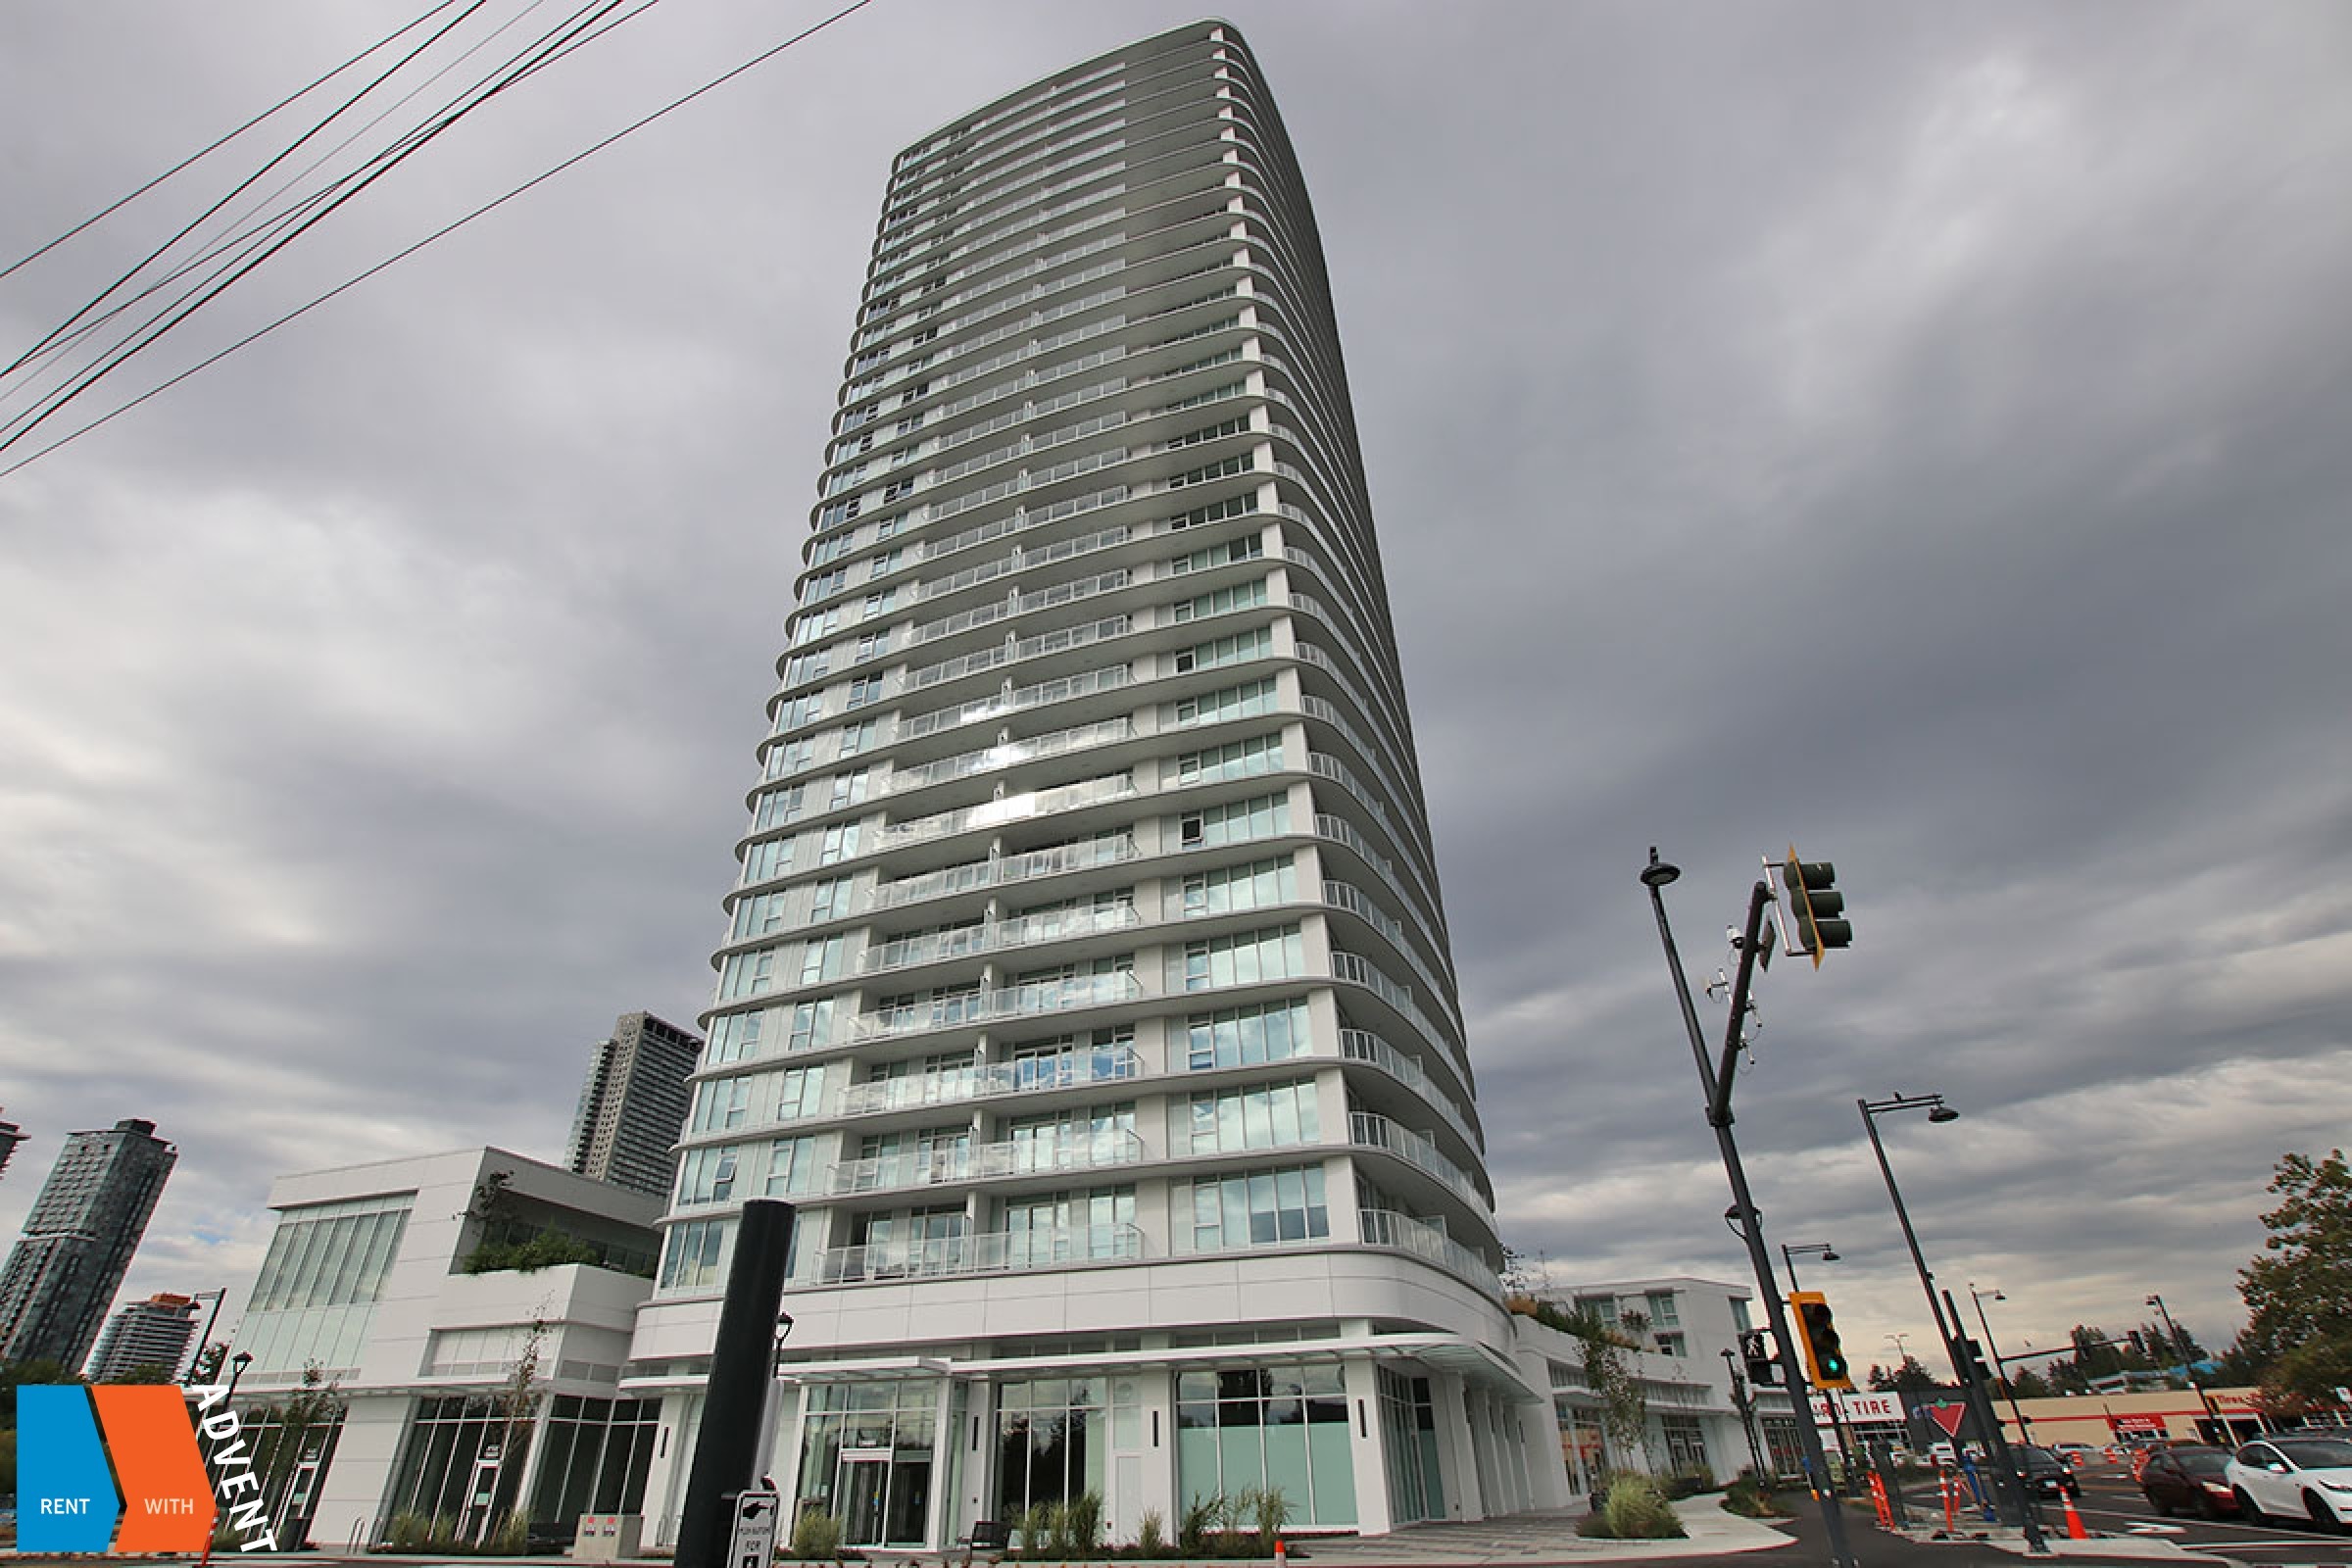 Brand New 11th Floor 1 Bedroom Apartment Rental at Georgetown in Whalley, Surrey. 1101 - 13685 102 Avenue, Surrey, BC, Canada.